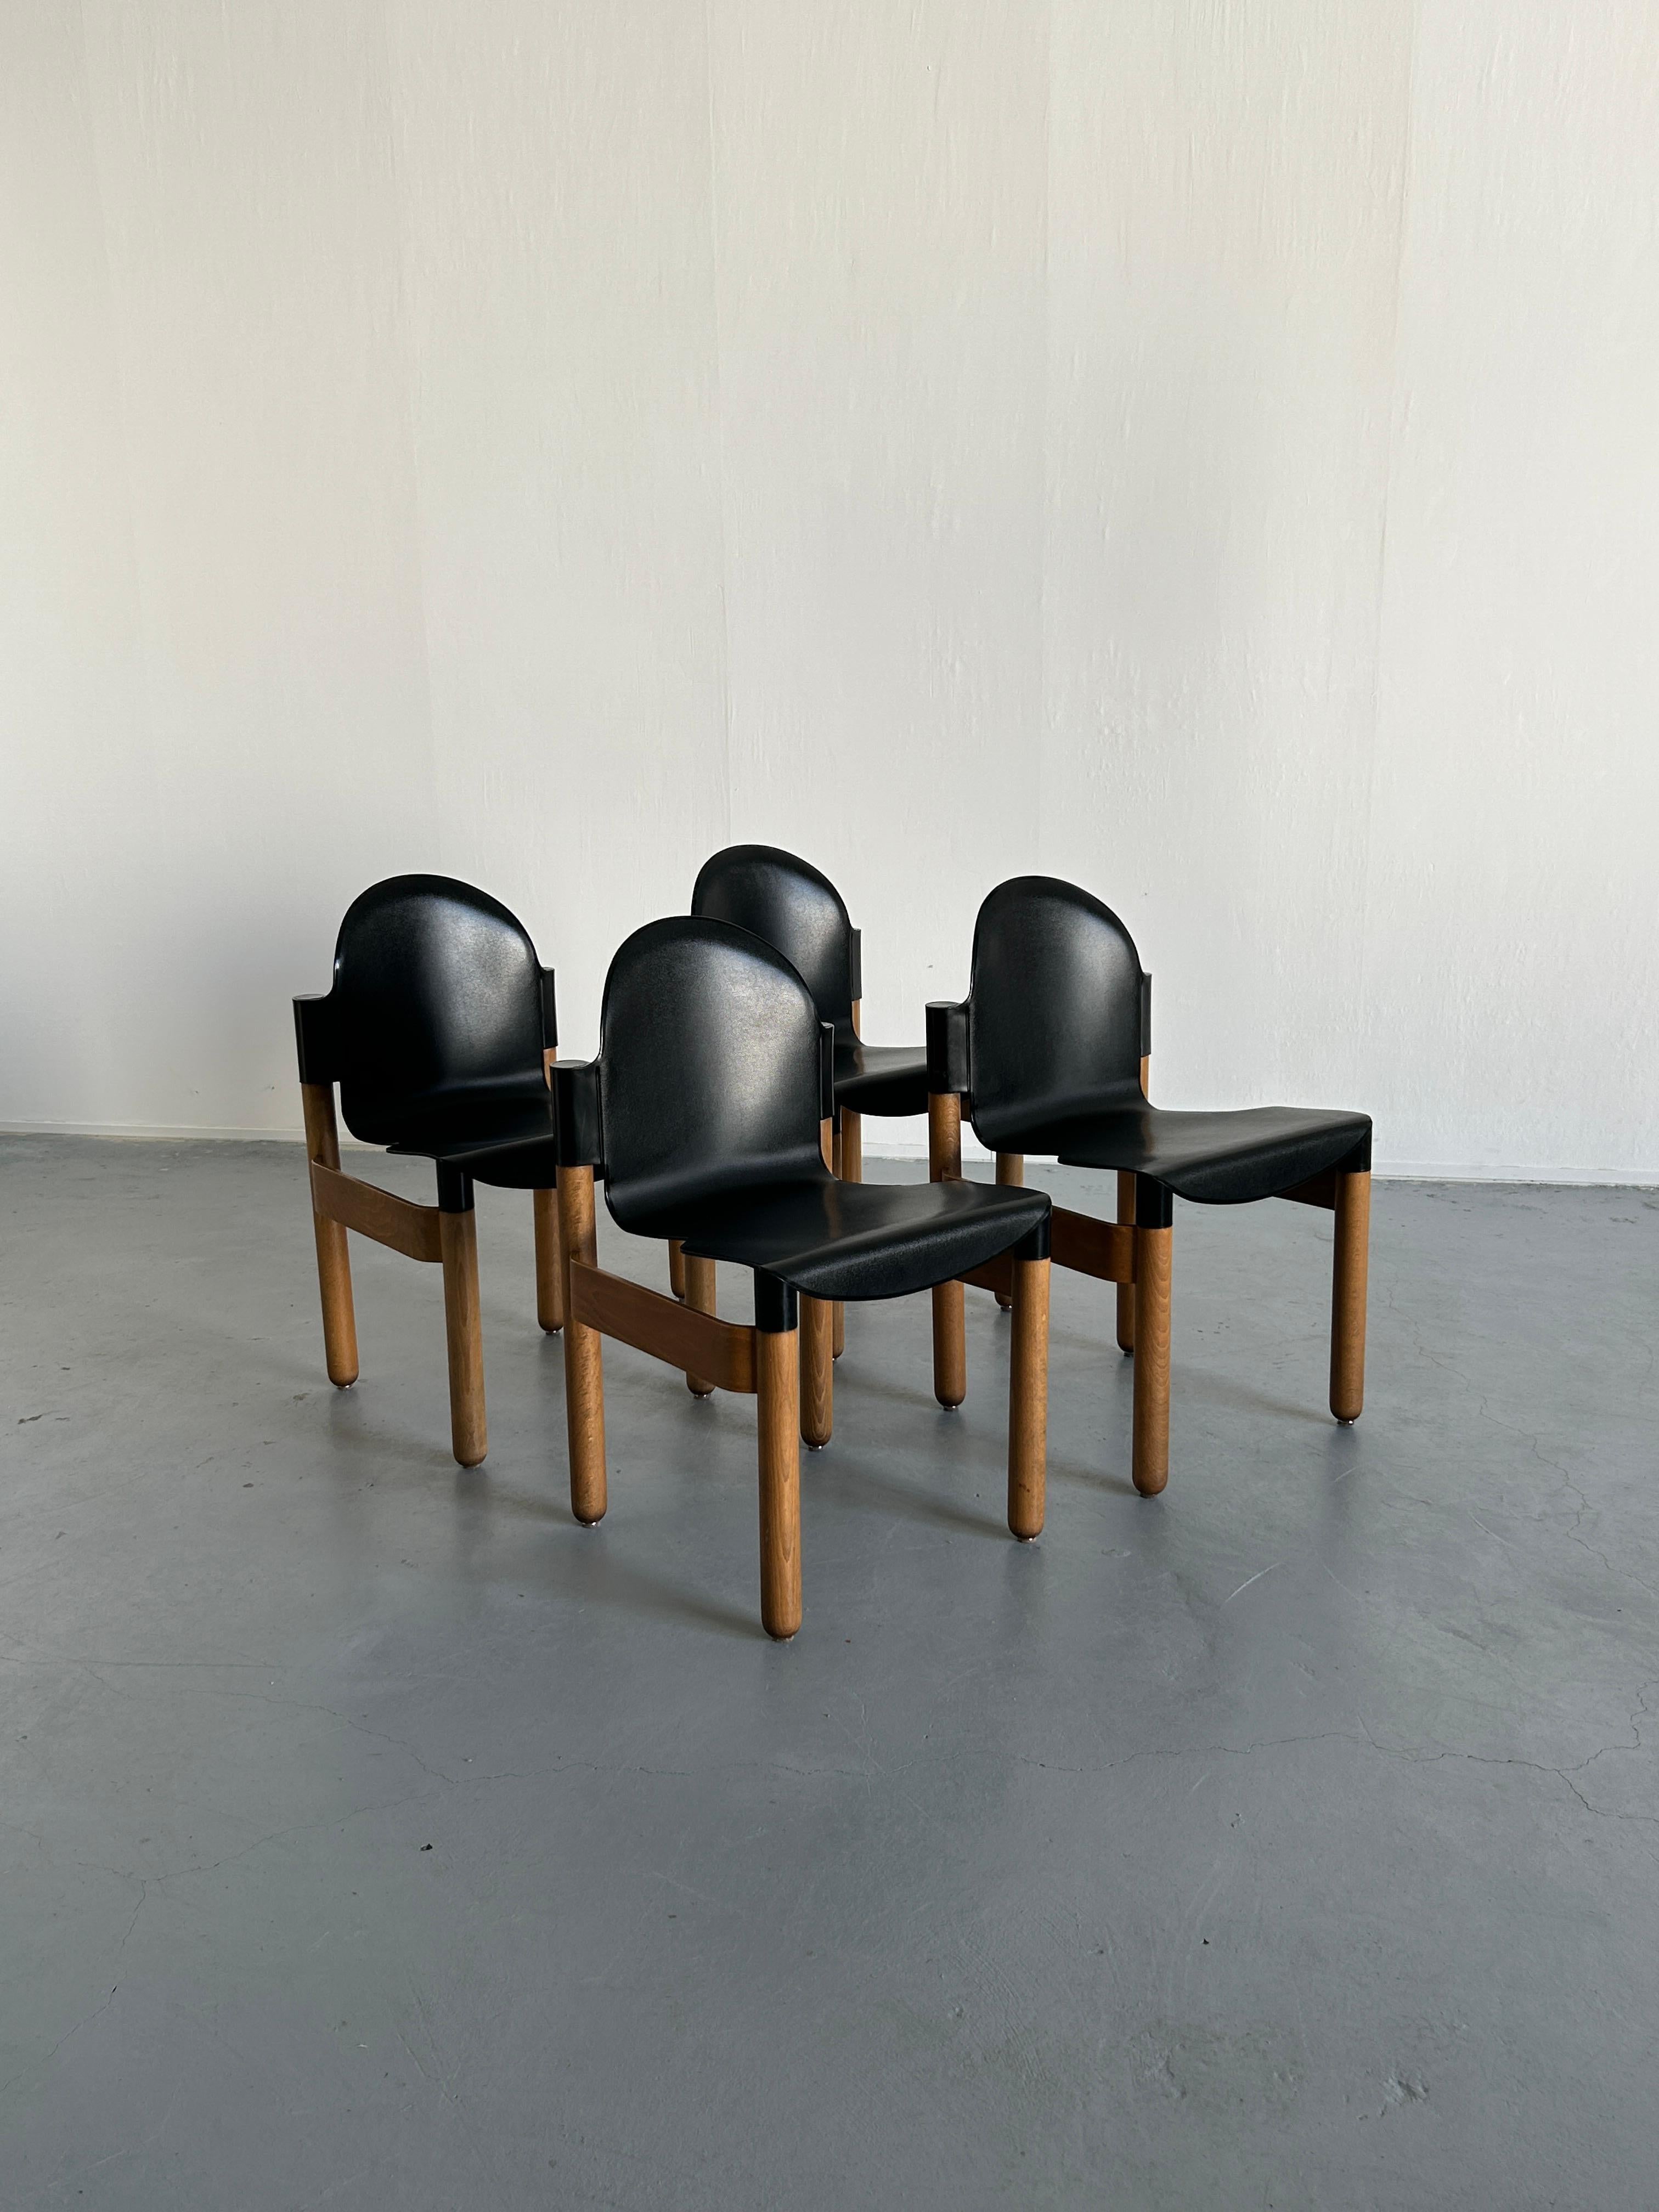 Set of four vintage Thonet Flex 2000 chairs, designed by Gerd Lange for Thonet and produced by Thonet during the 1980s.

Comfortable and quality made. Flexible plastic seat. Lightweight. Stackable.

Overall in good vintage condition, with